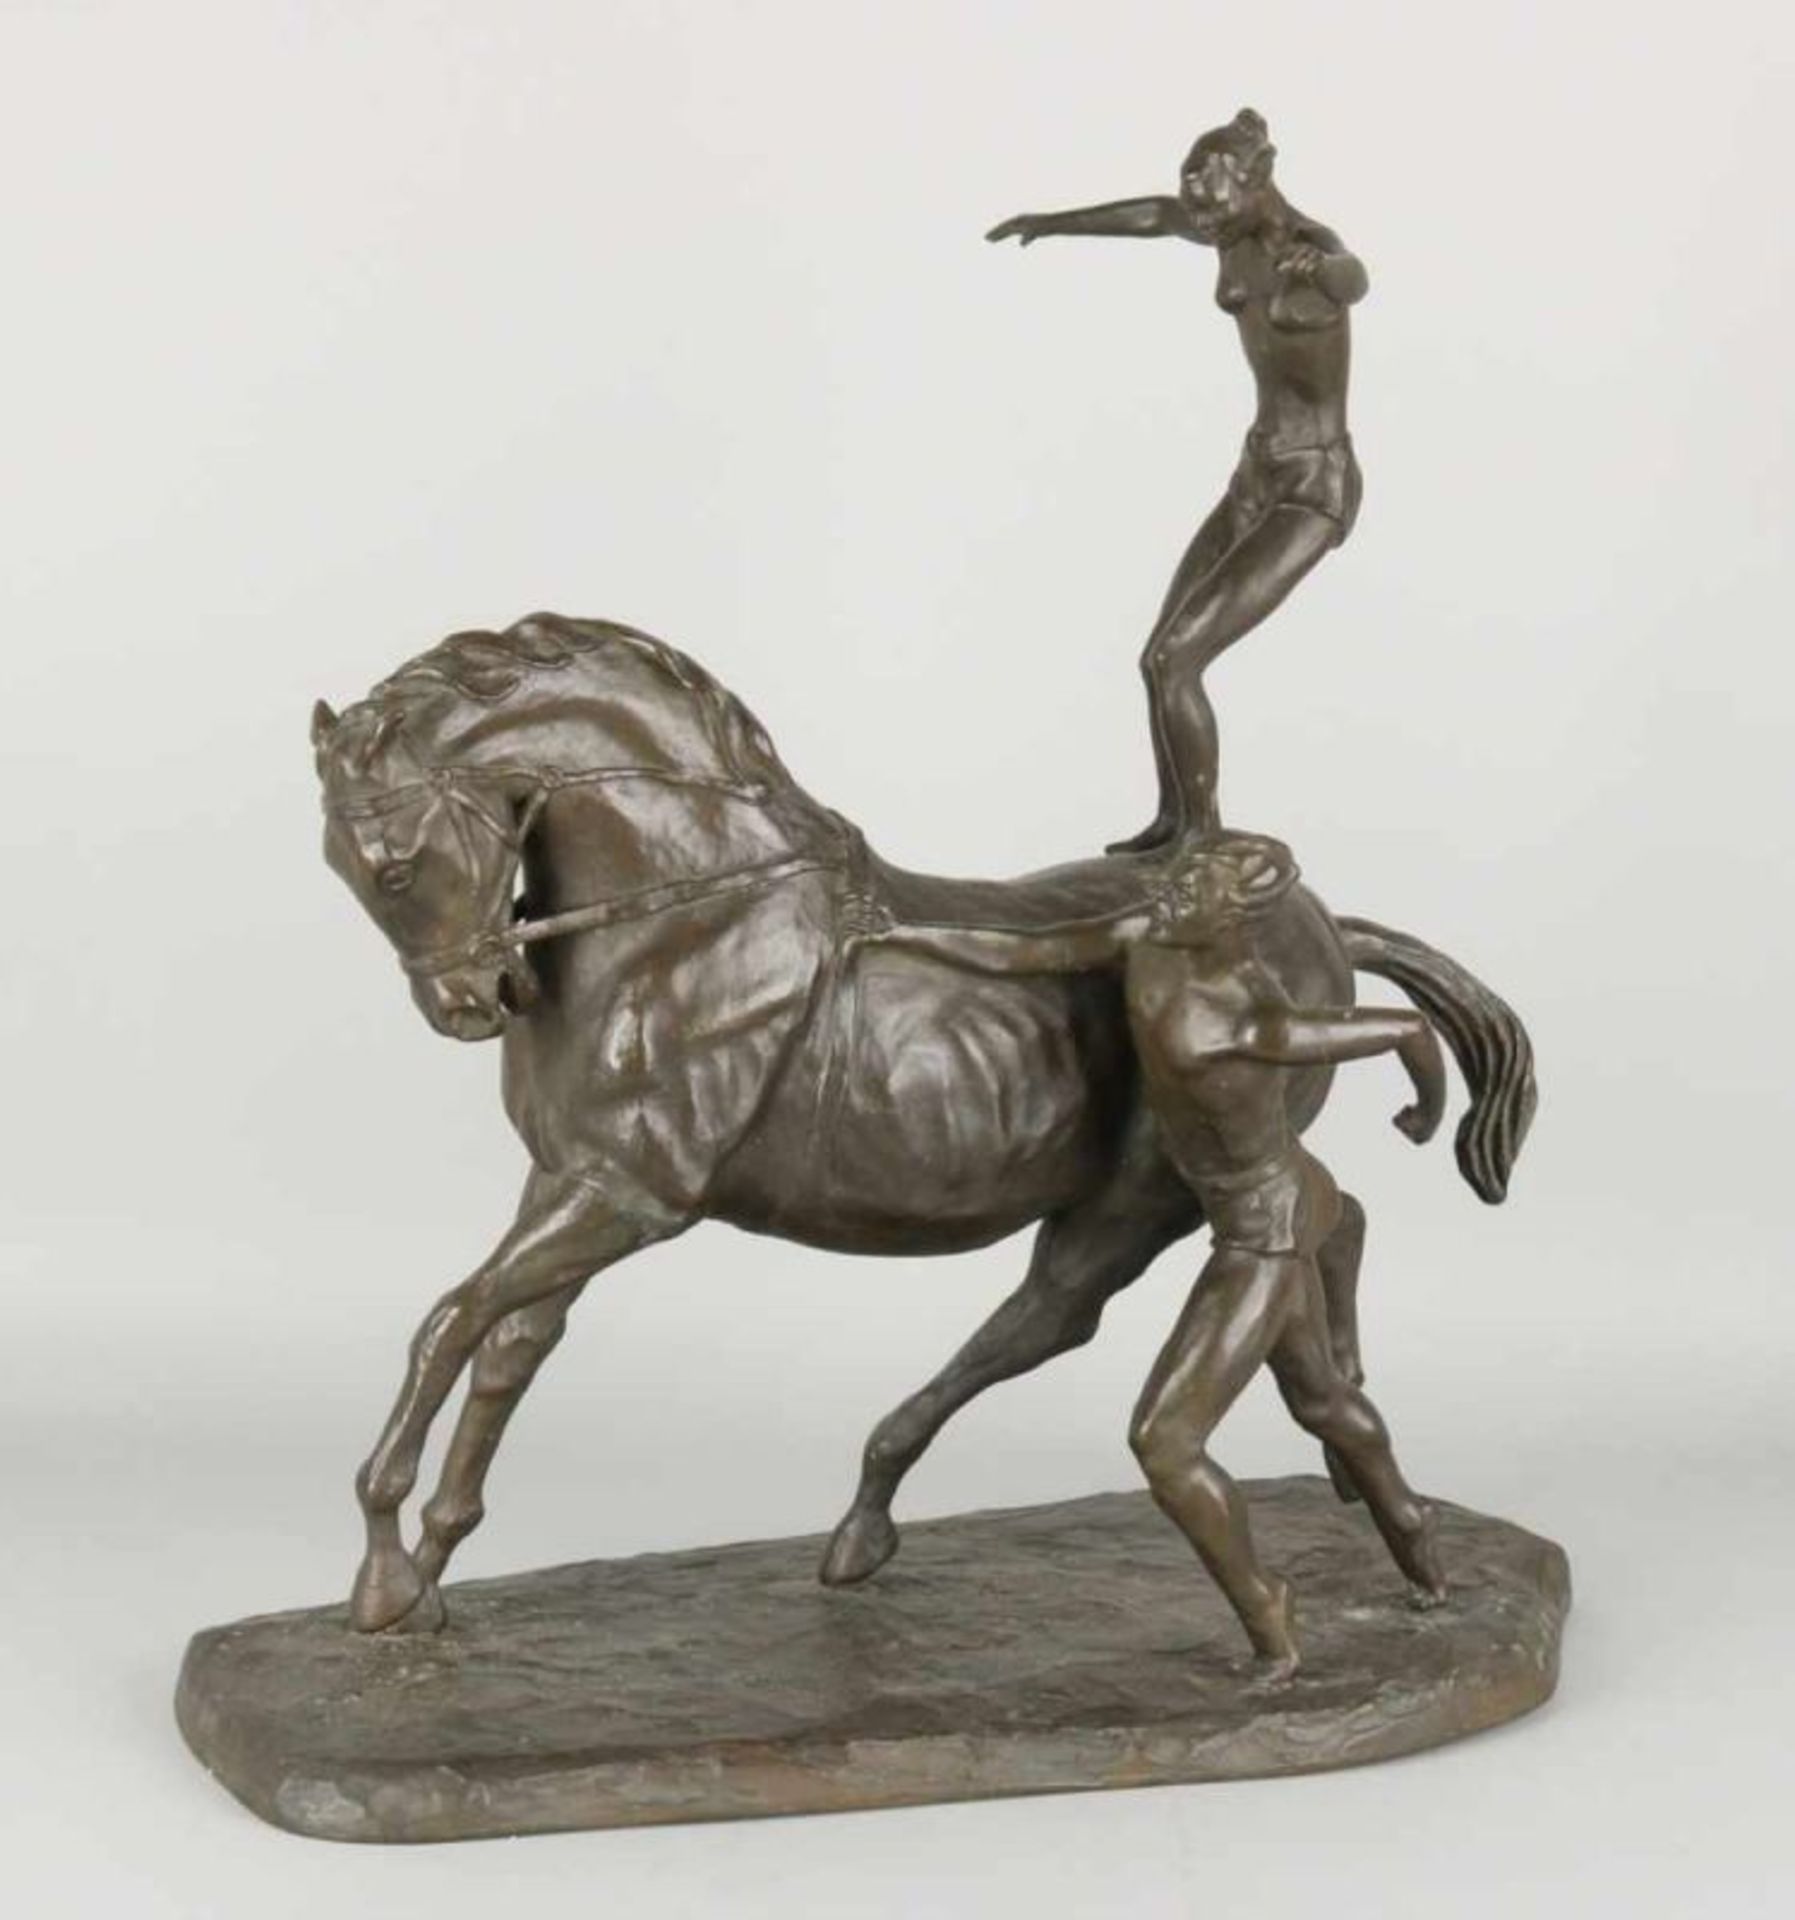 Bronze figure by the Dutch sculptor Han Rehm. 1908 - 1970. Juggling figures with horse. Size: 49 x